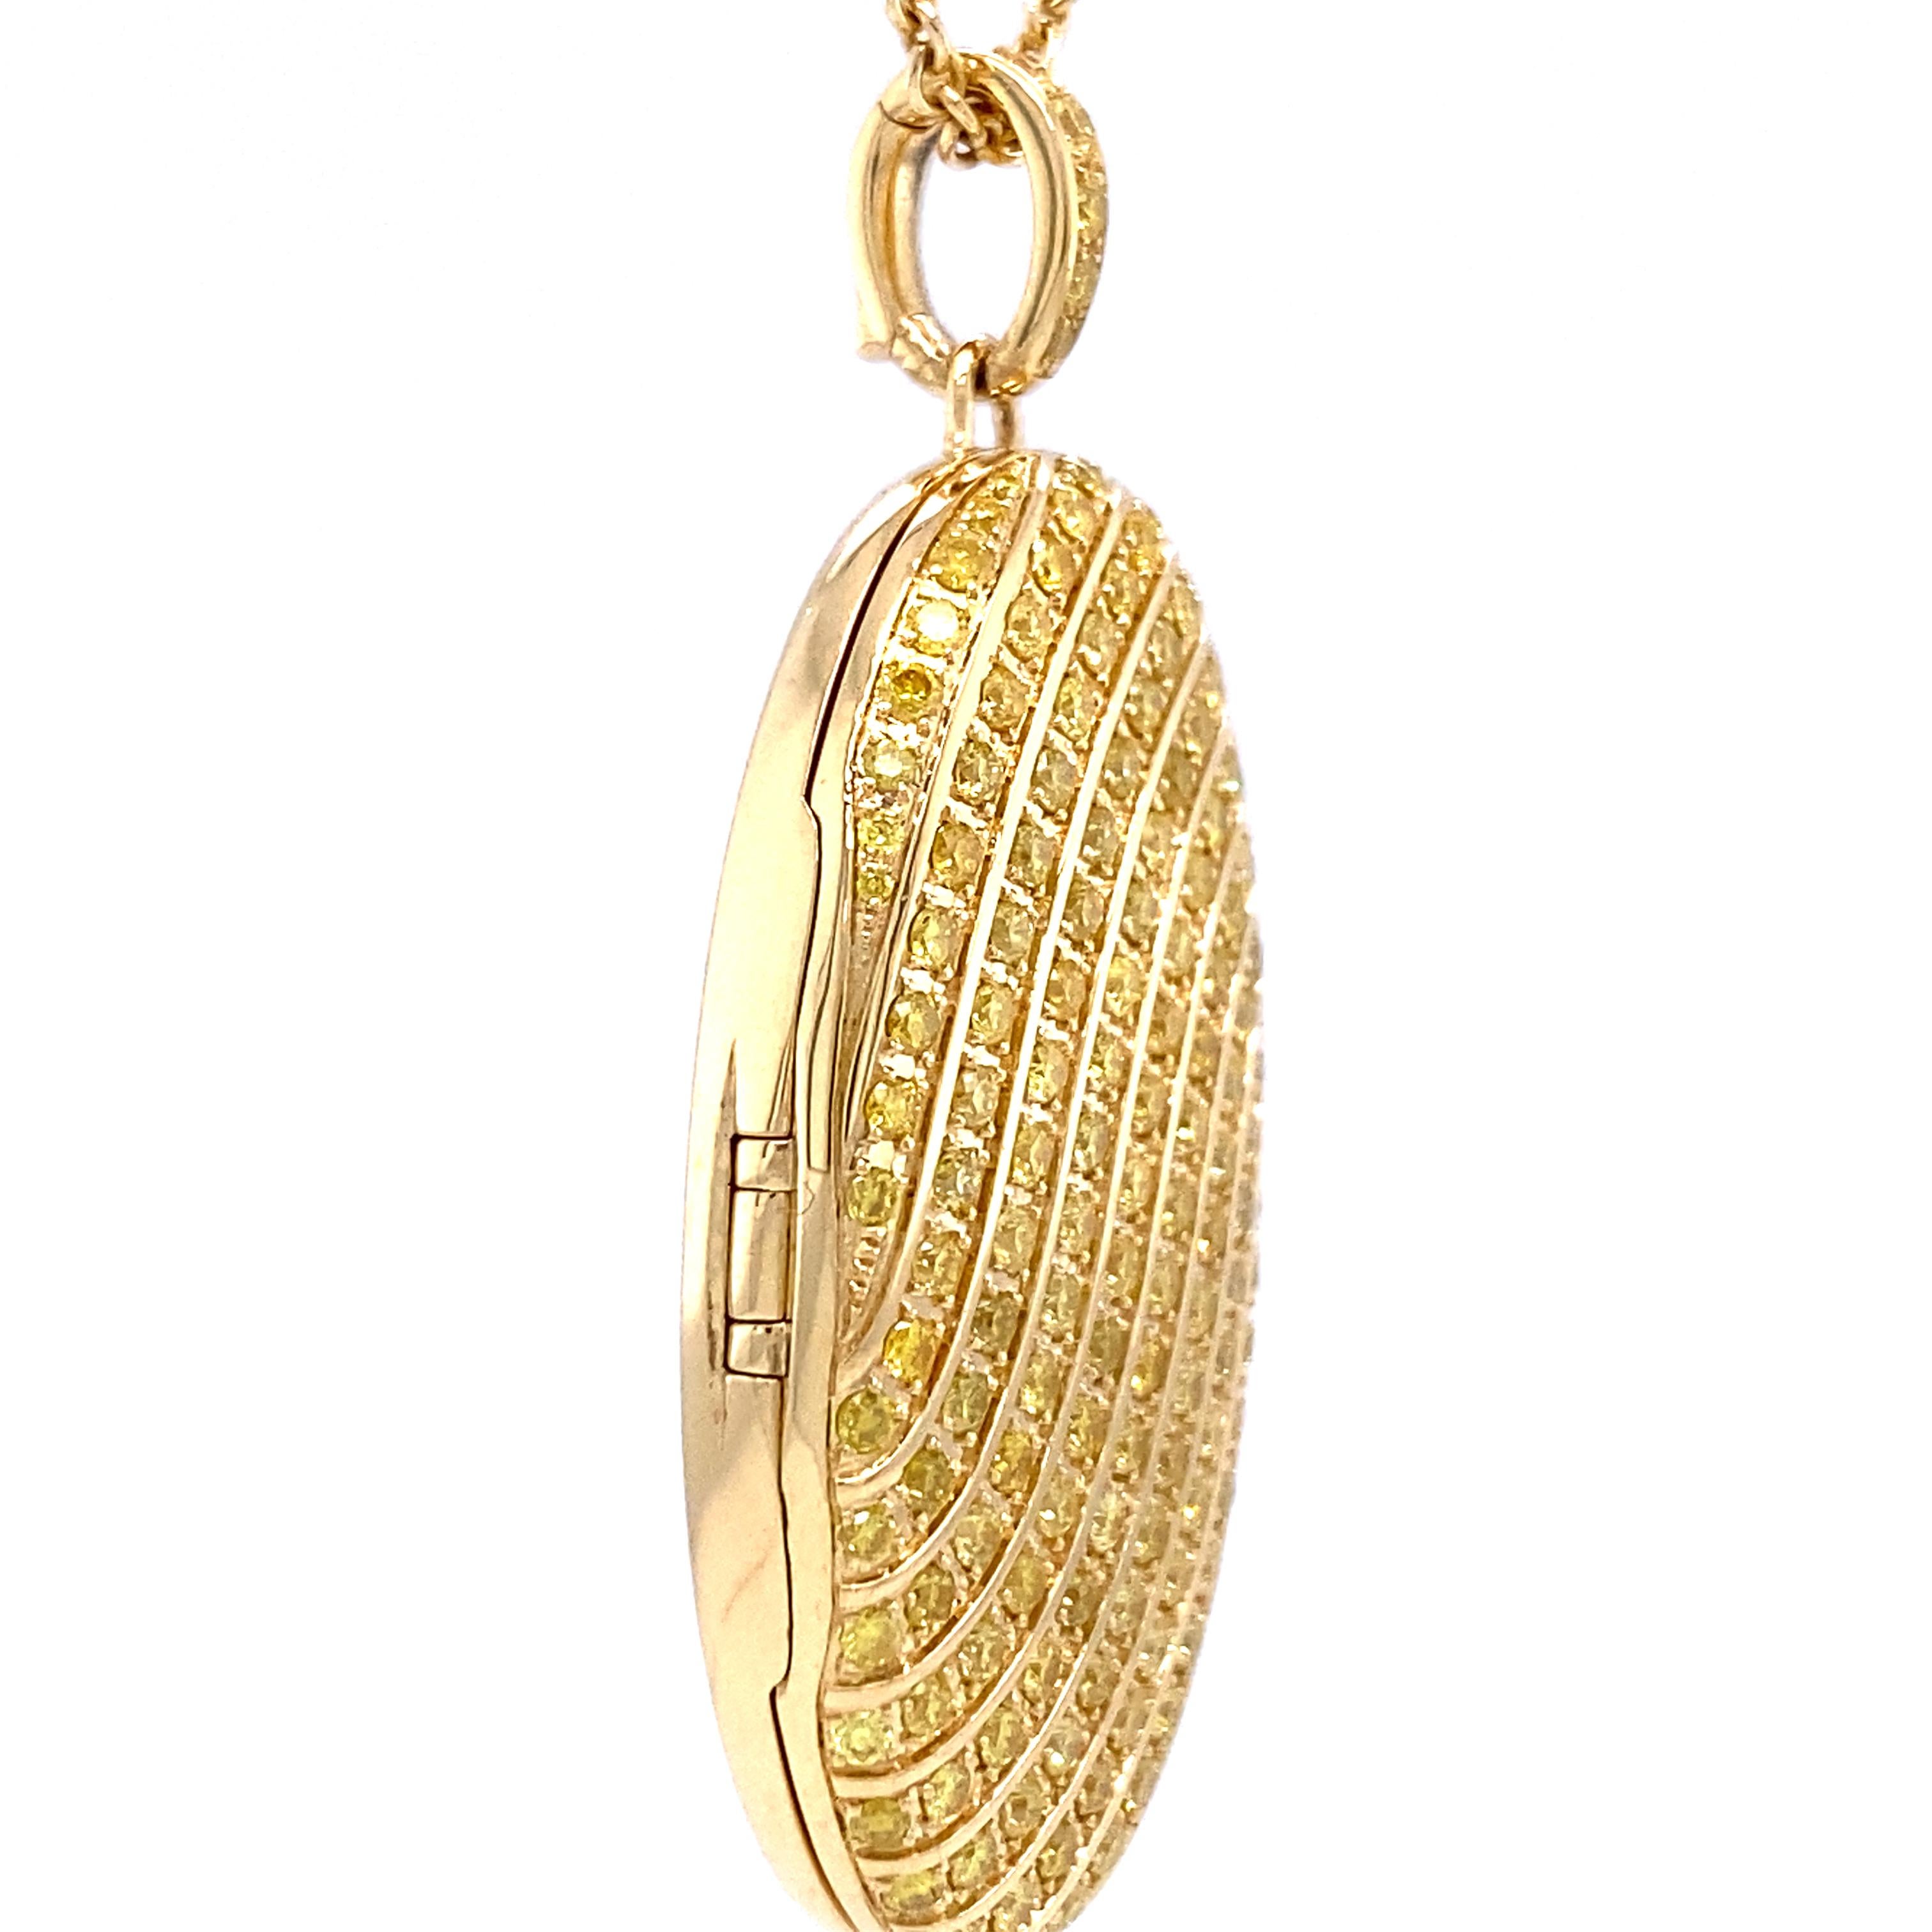 Victor Mayer Calima Locket Necklace in 18k Yellow Gold 155 Fancy Yellow Diamonds For Sale 4